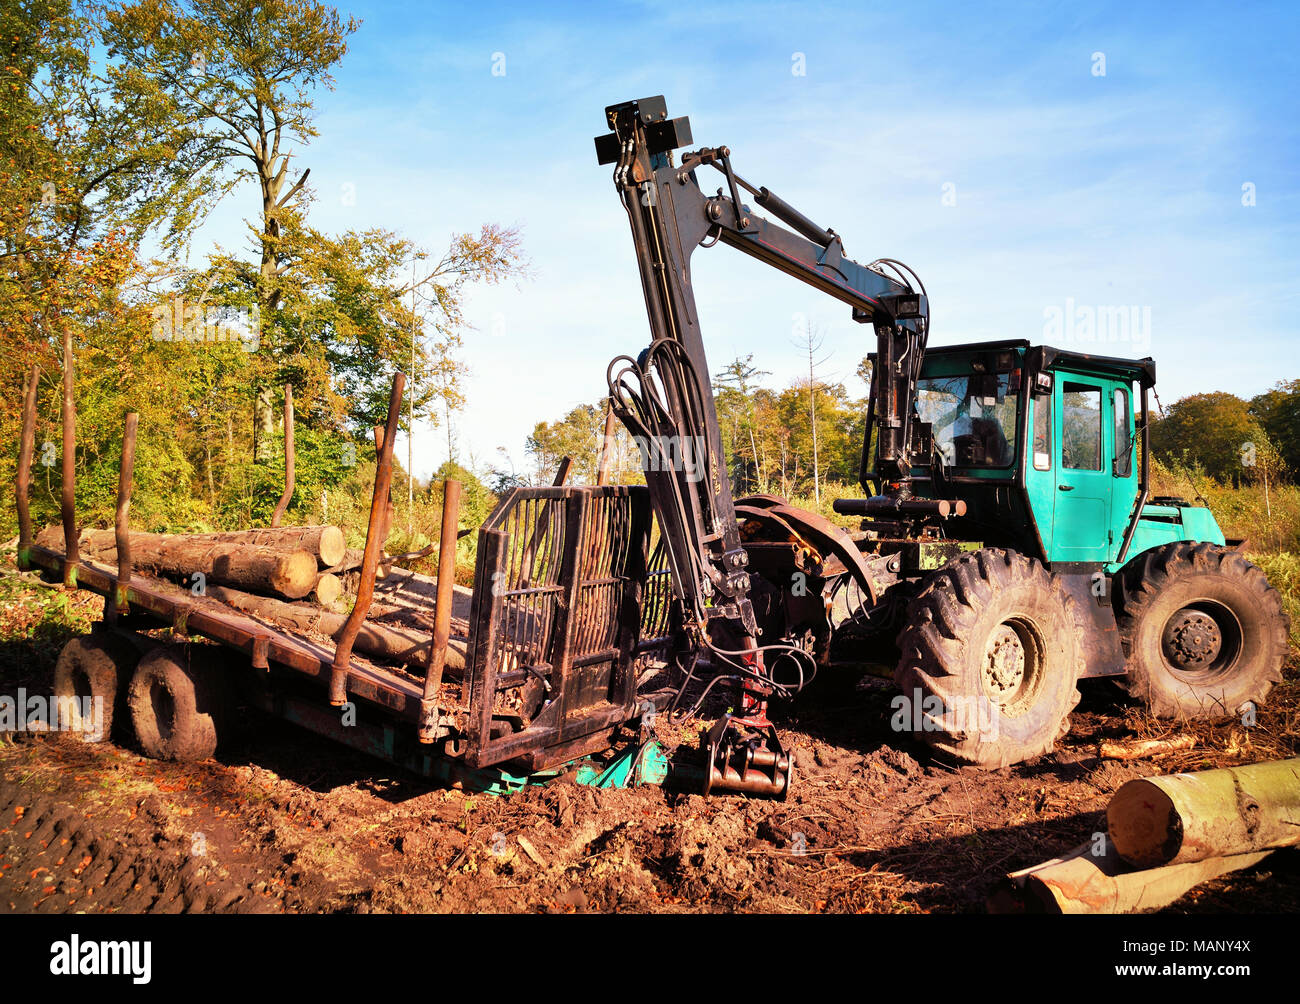 Lumber industry scene with pile of wood or tree trunks and tractor machinery. Stock Photo